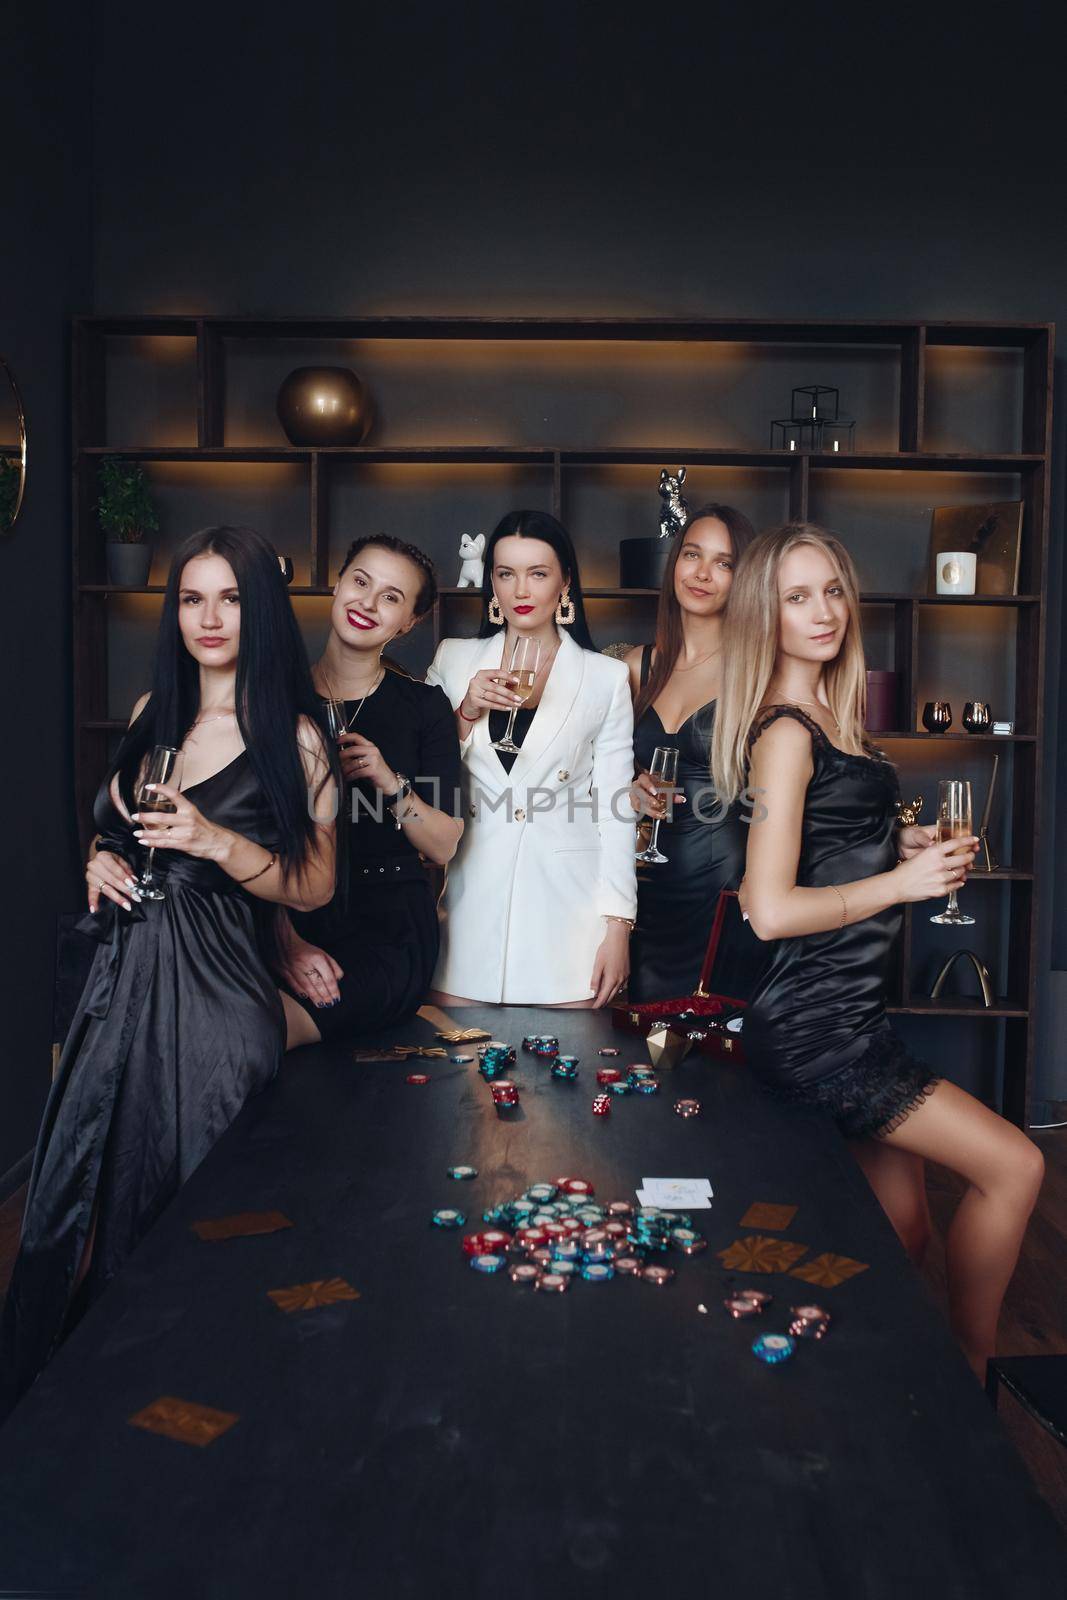 Gorgeous sexy ladies at poker table with drinks. by StudioLucky